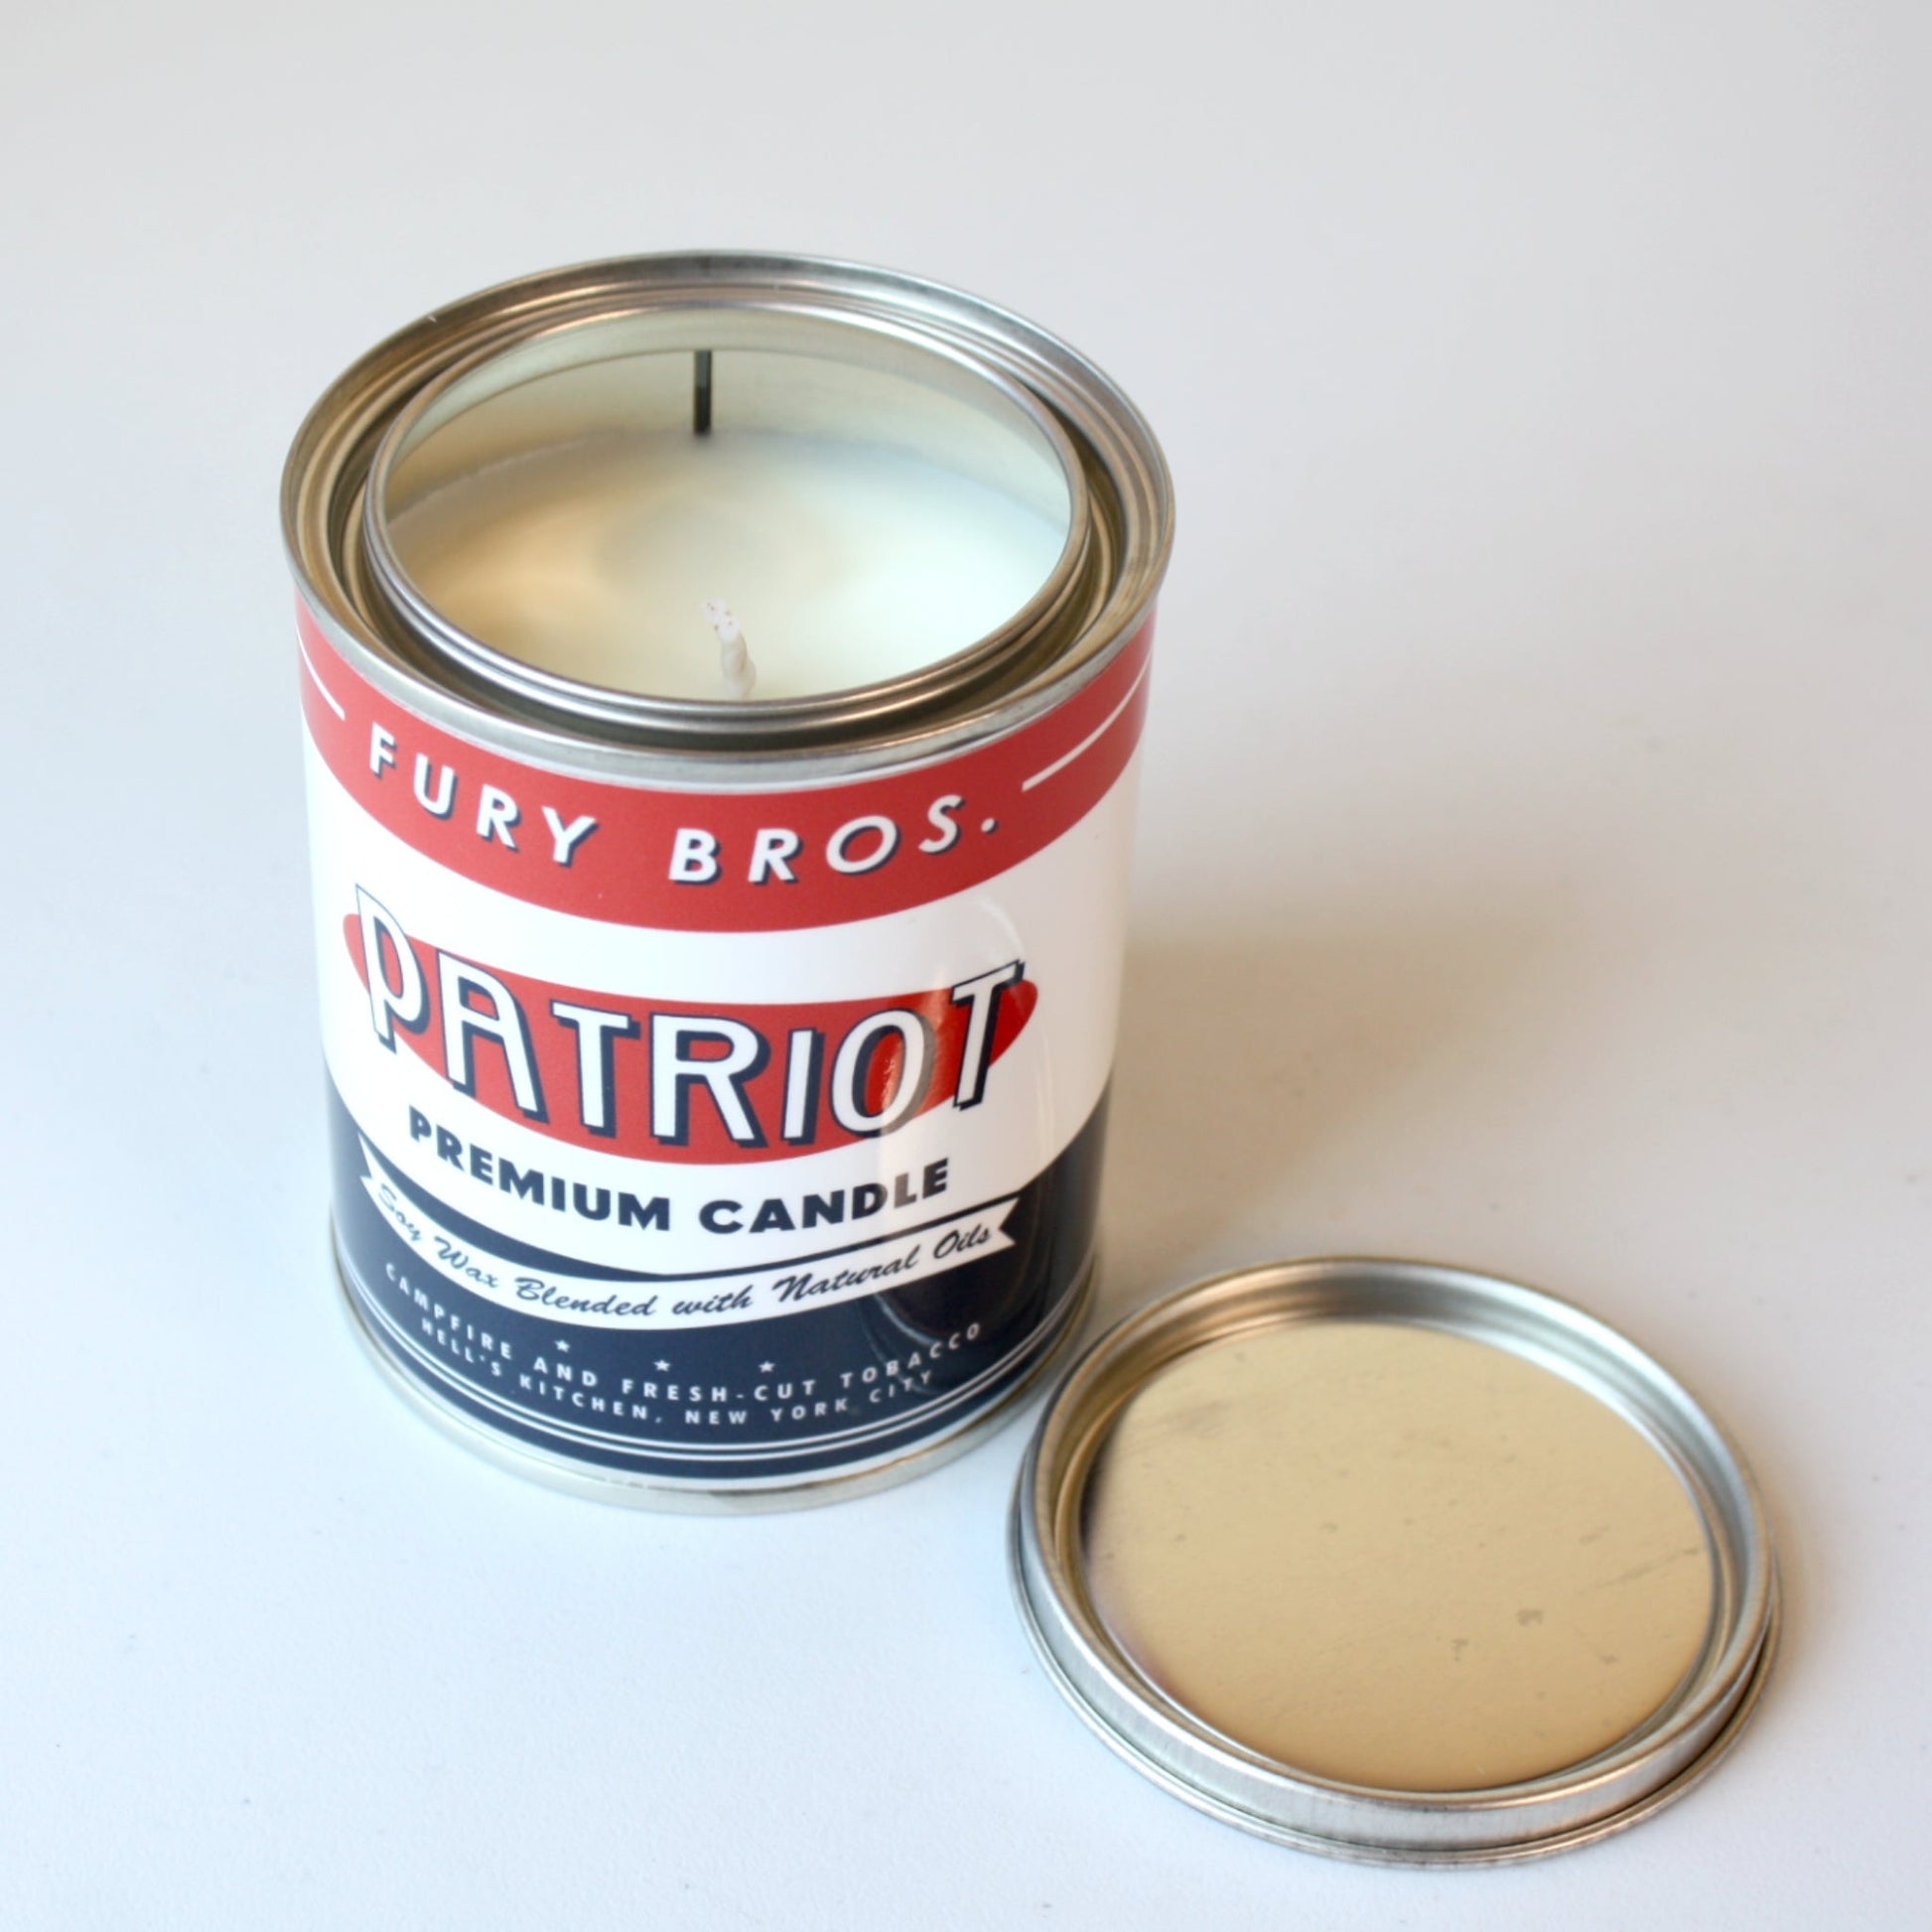 Patriot Premium Candle - Made in the USA